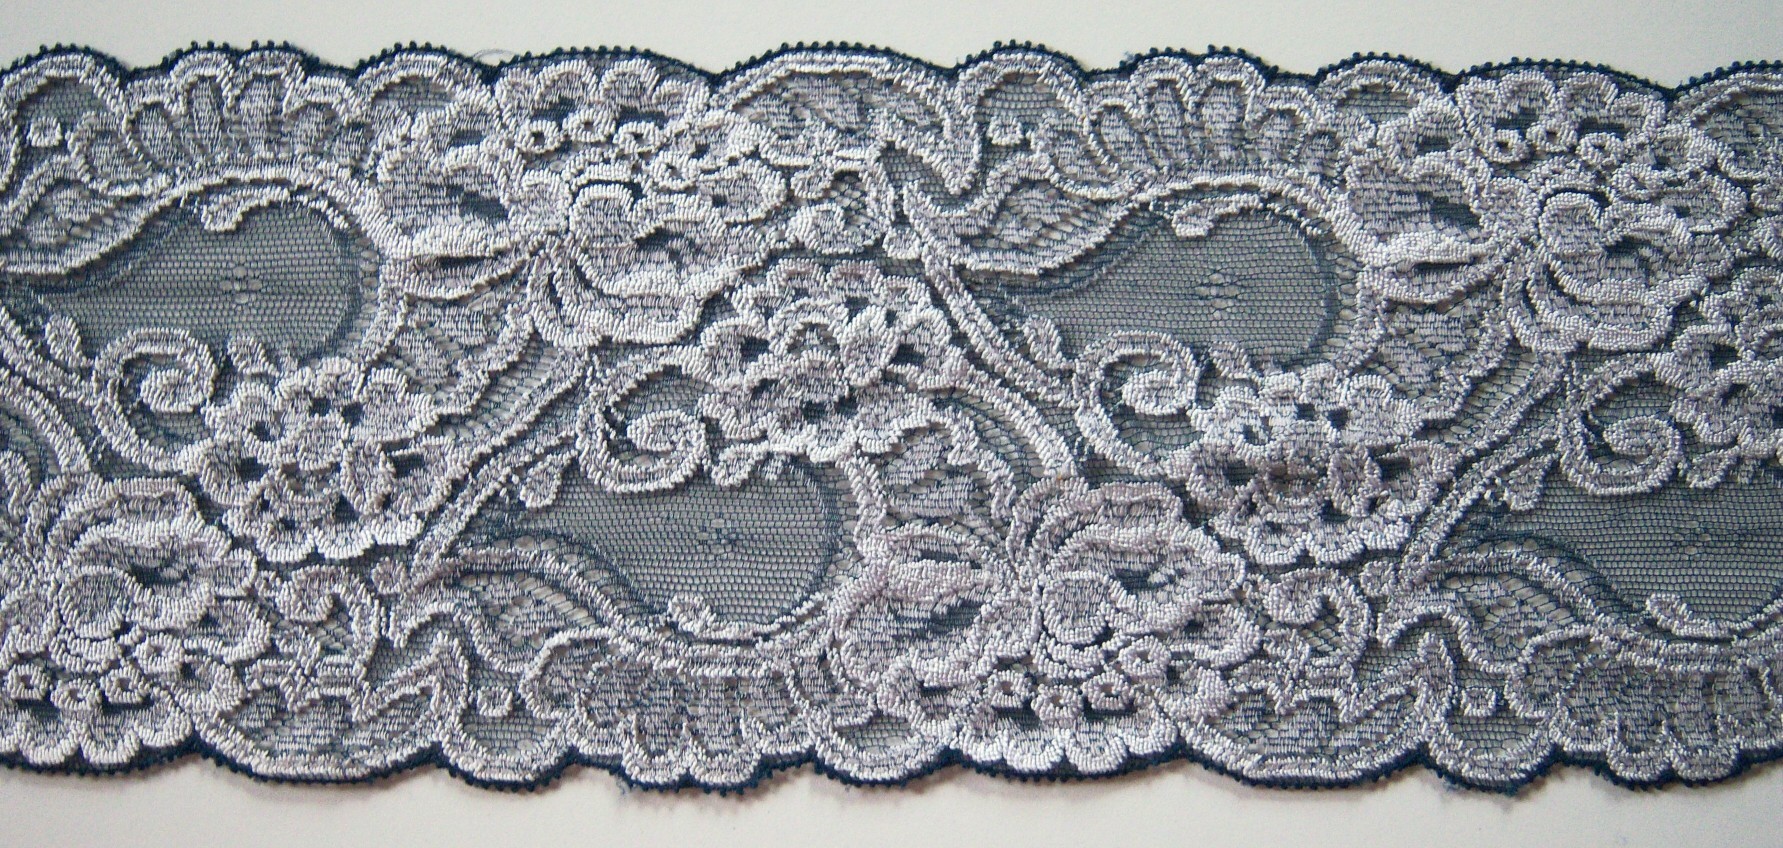 White/Silver/Navy 5" Lace